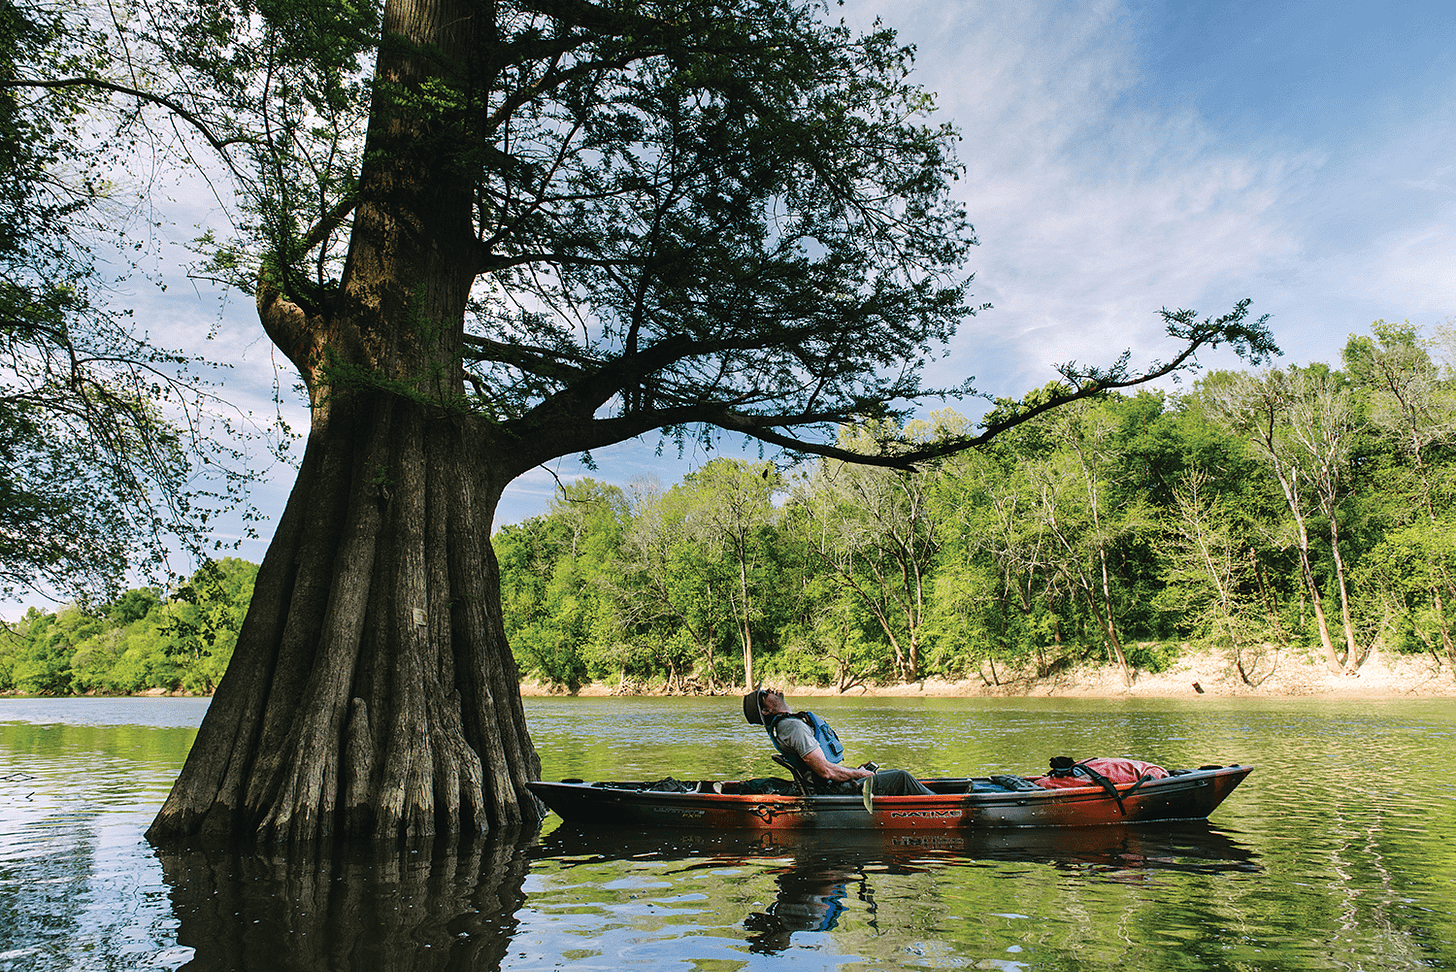 Jeremy Markovich paddling the Cape Fear River, Looking at a cypress tree